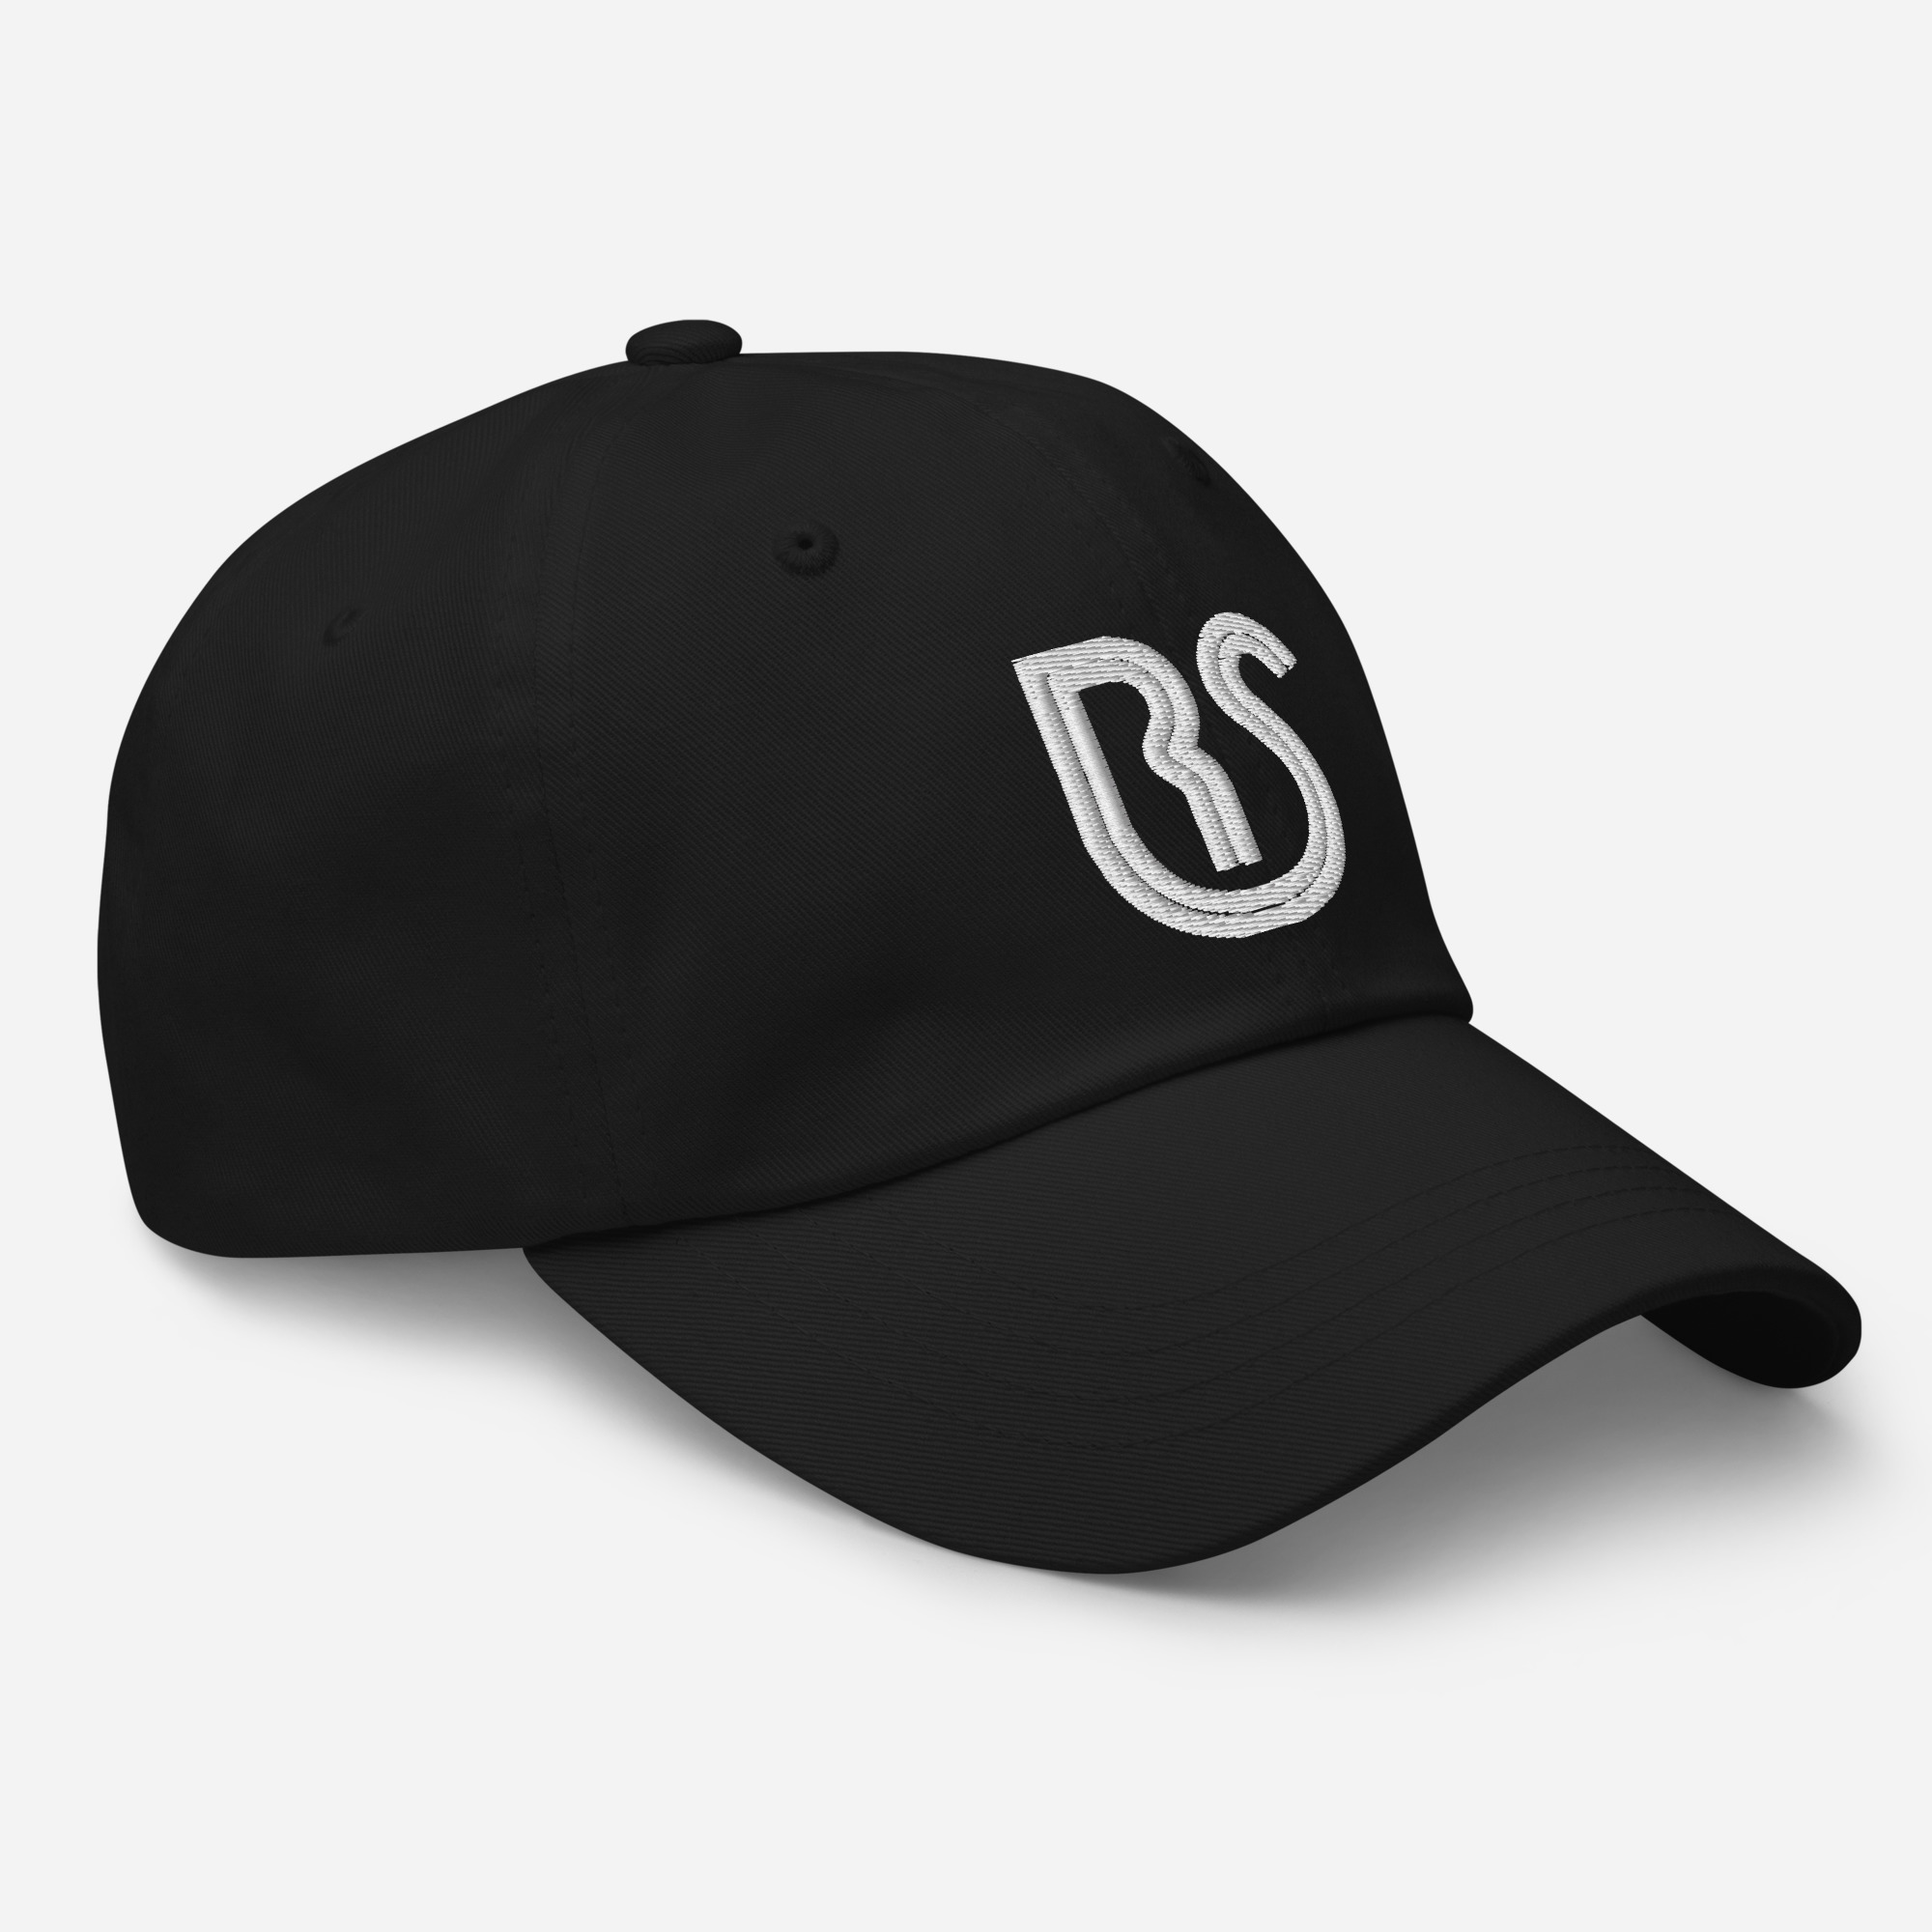 classic-dad-hat-black-right-front-62039988d22b6